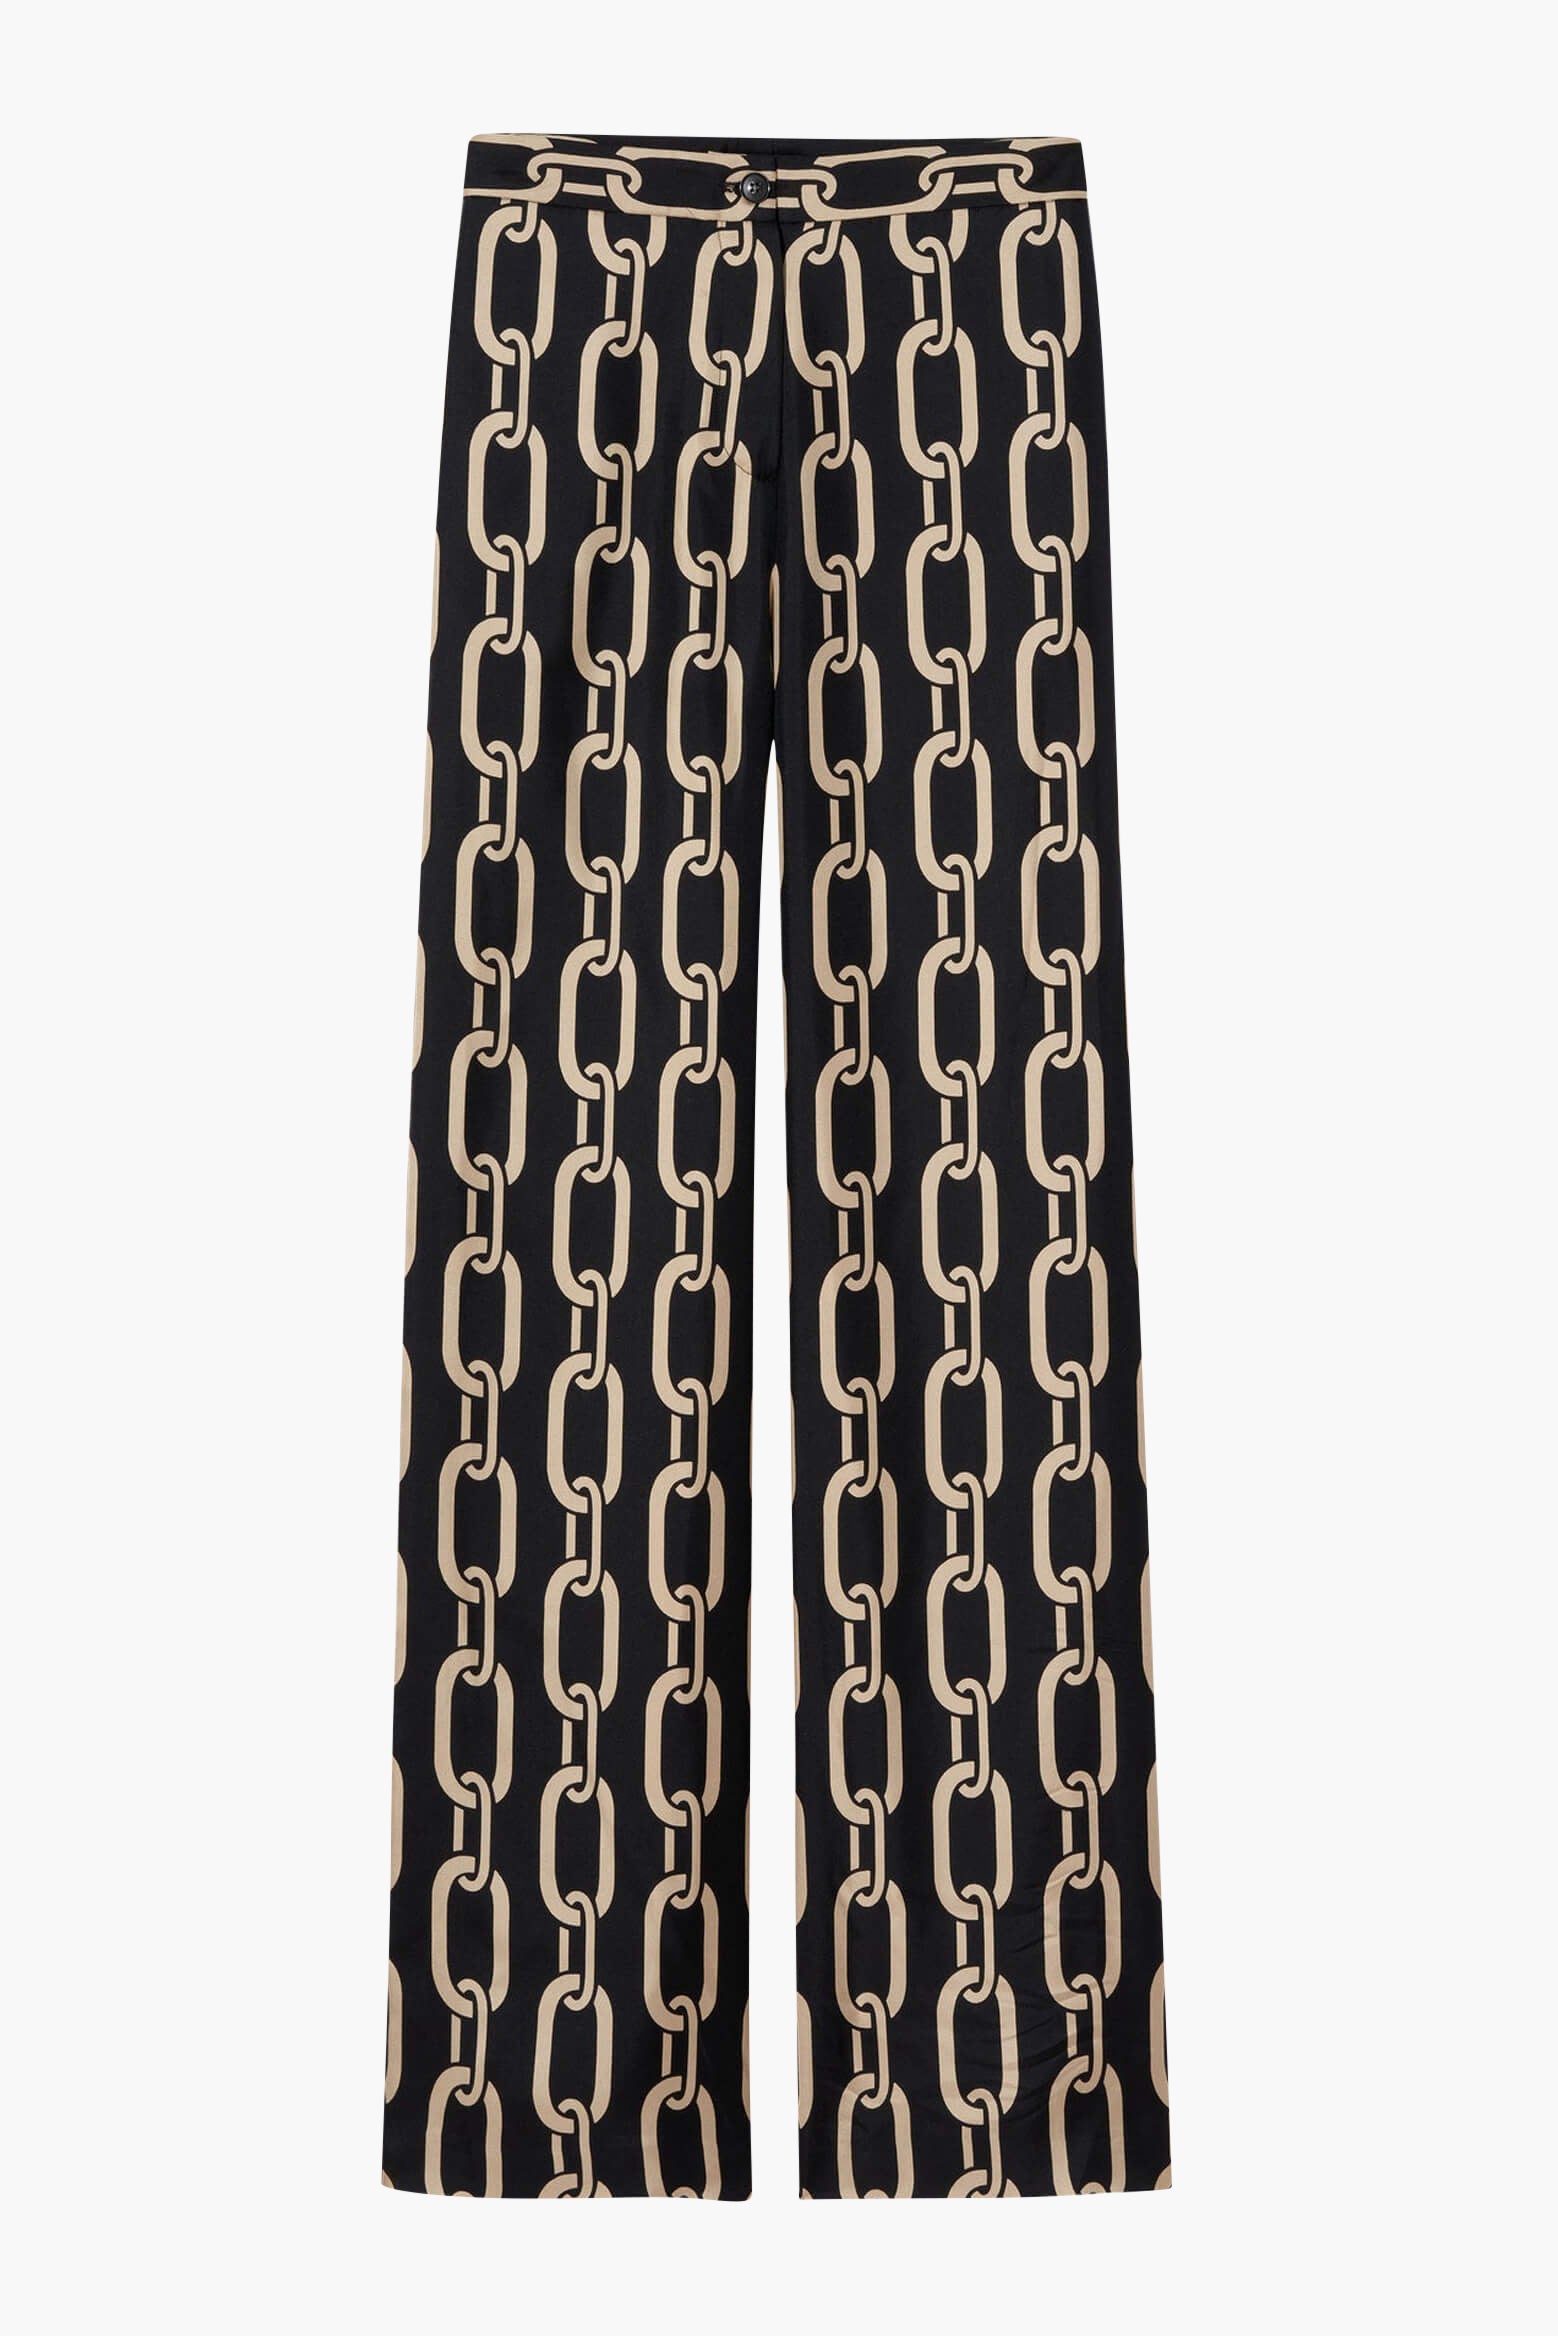 Nili Lotan Germain Silk Pant in Big Chain Gold/Black available at TNT The New Trend Australia. Free shipping for orders over $300 AUD.